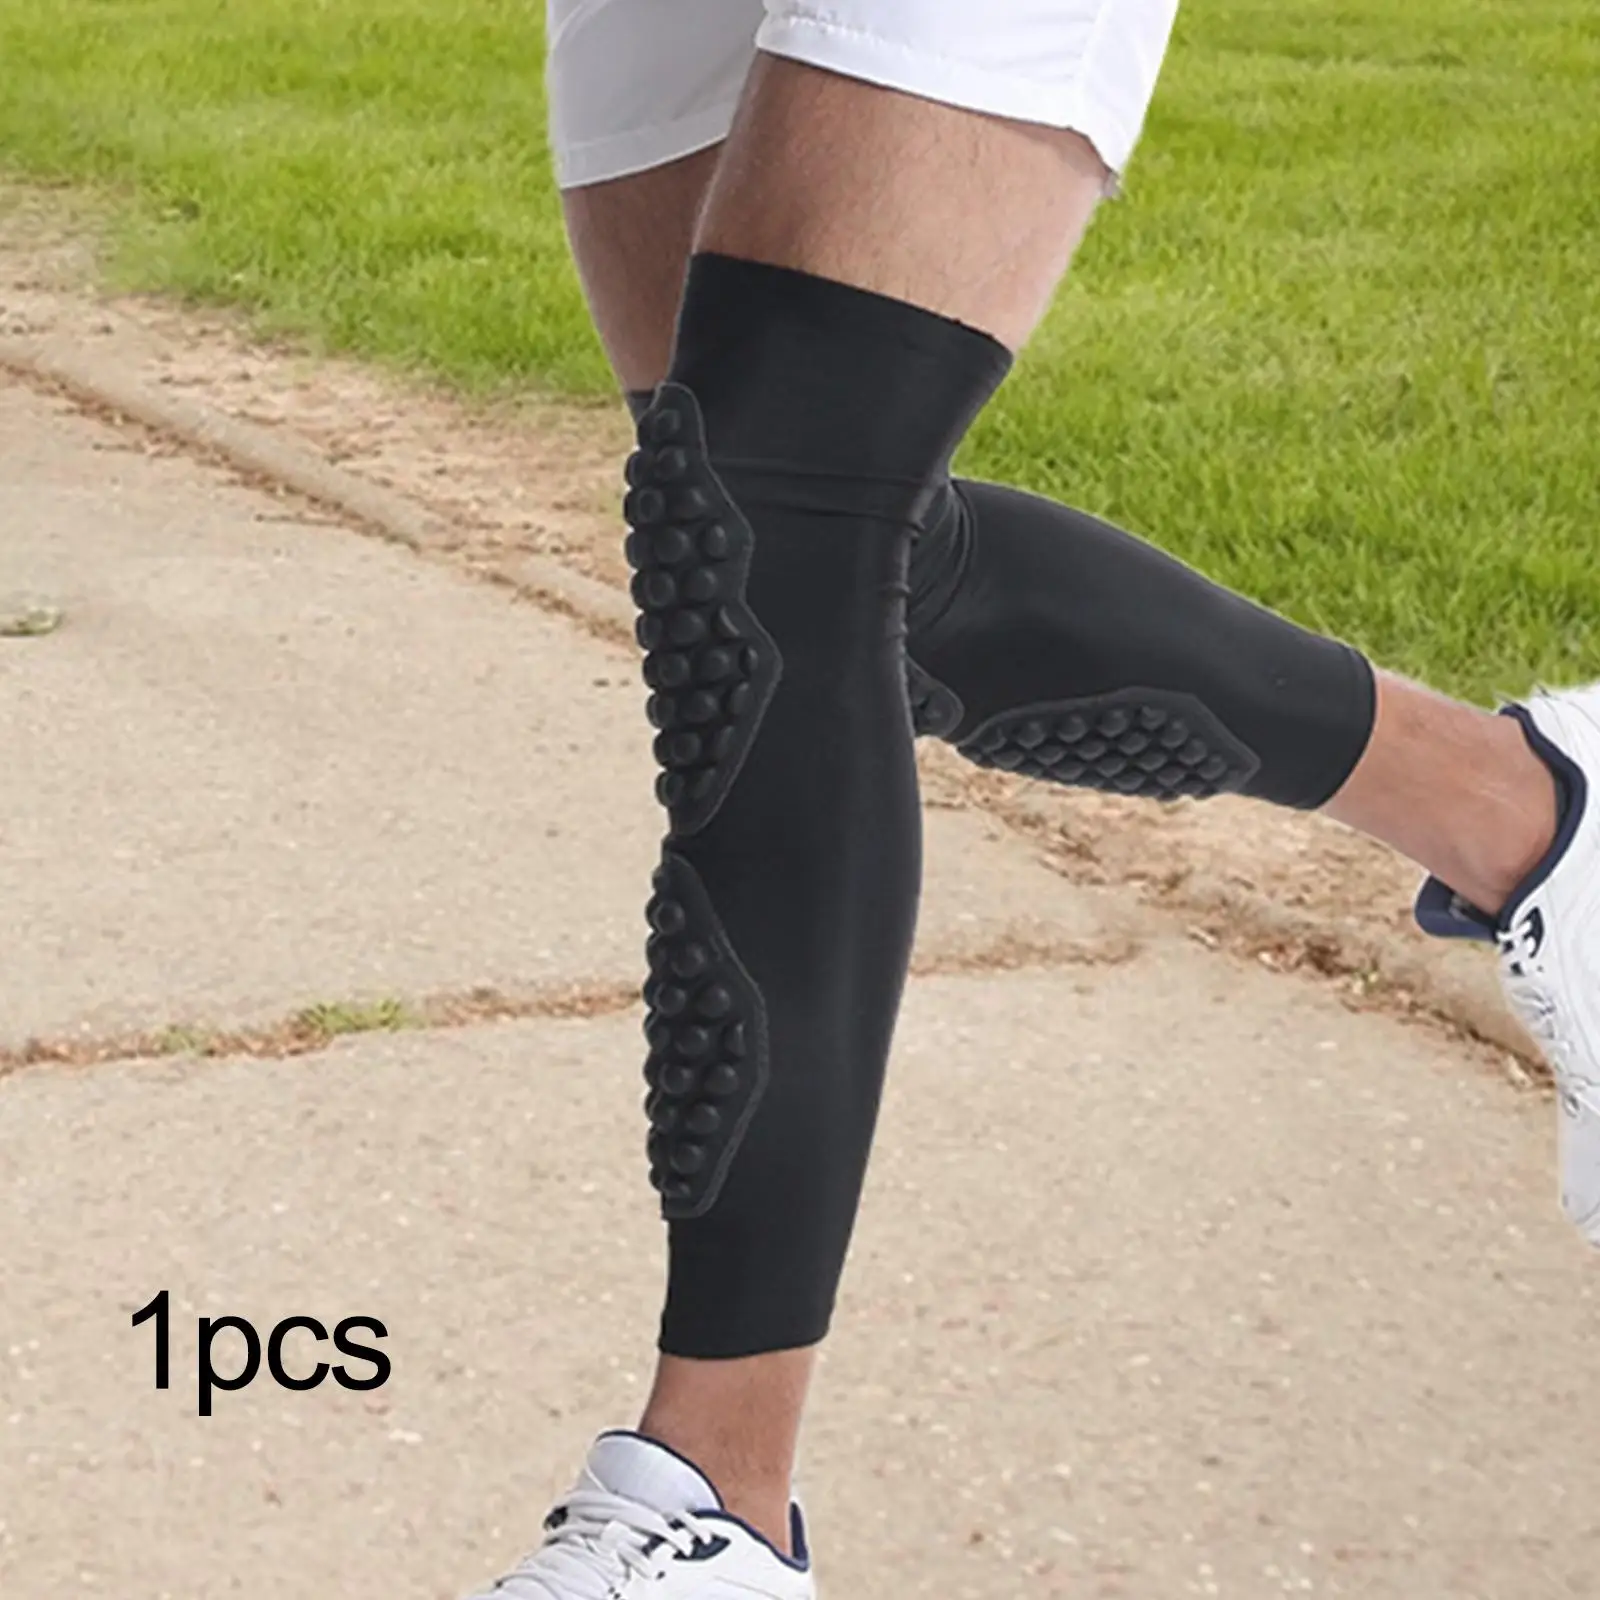 Knee Pad Anti Collision Working Basketball Skating Stretch Protective Sleeve